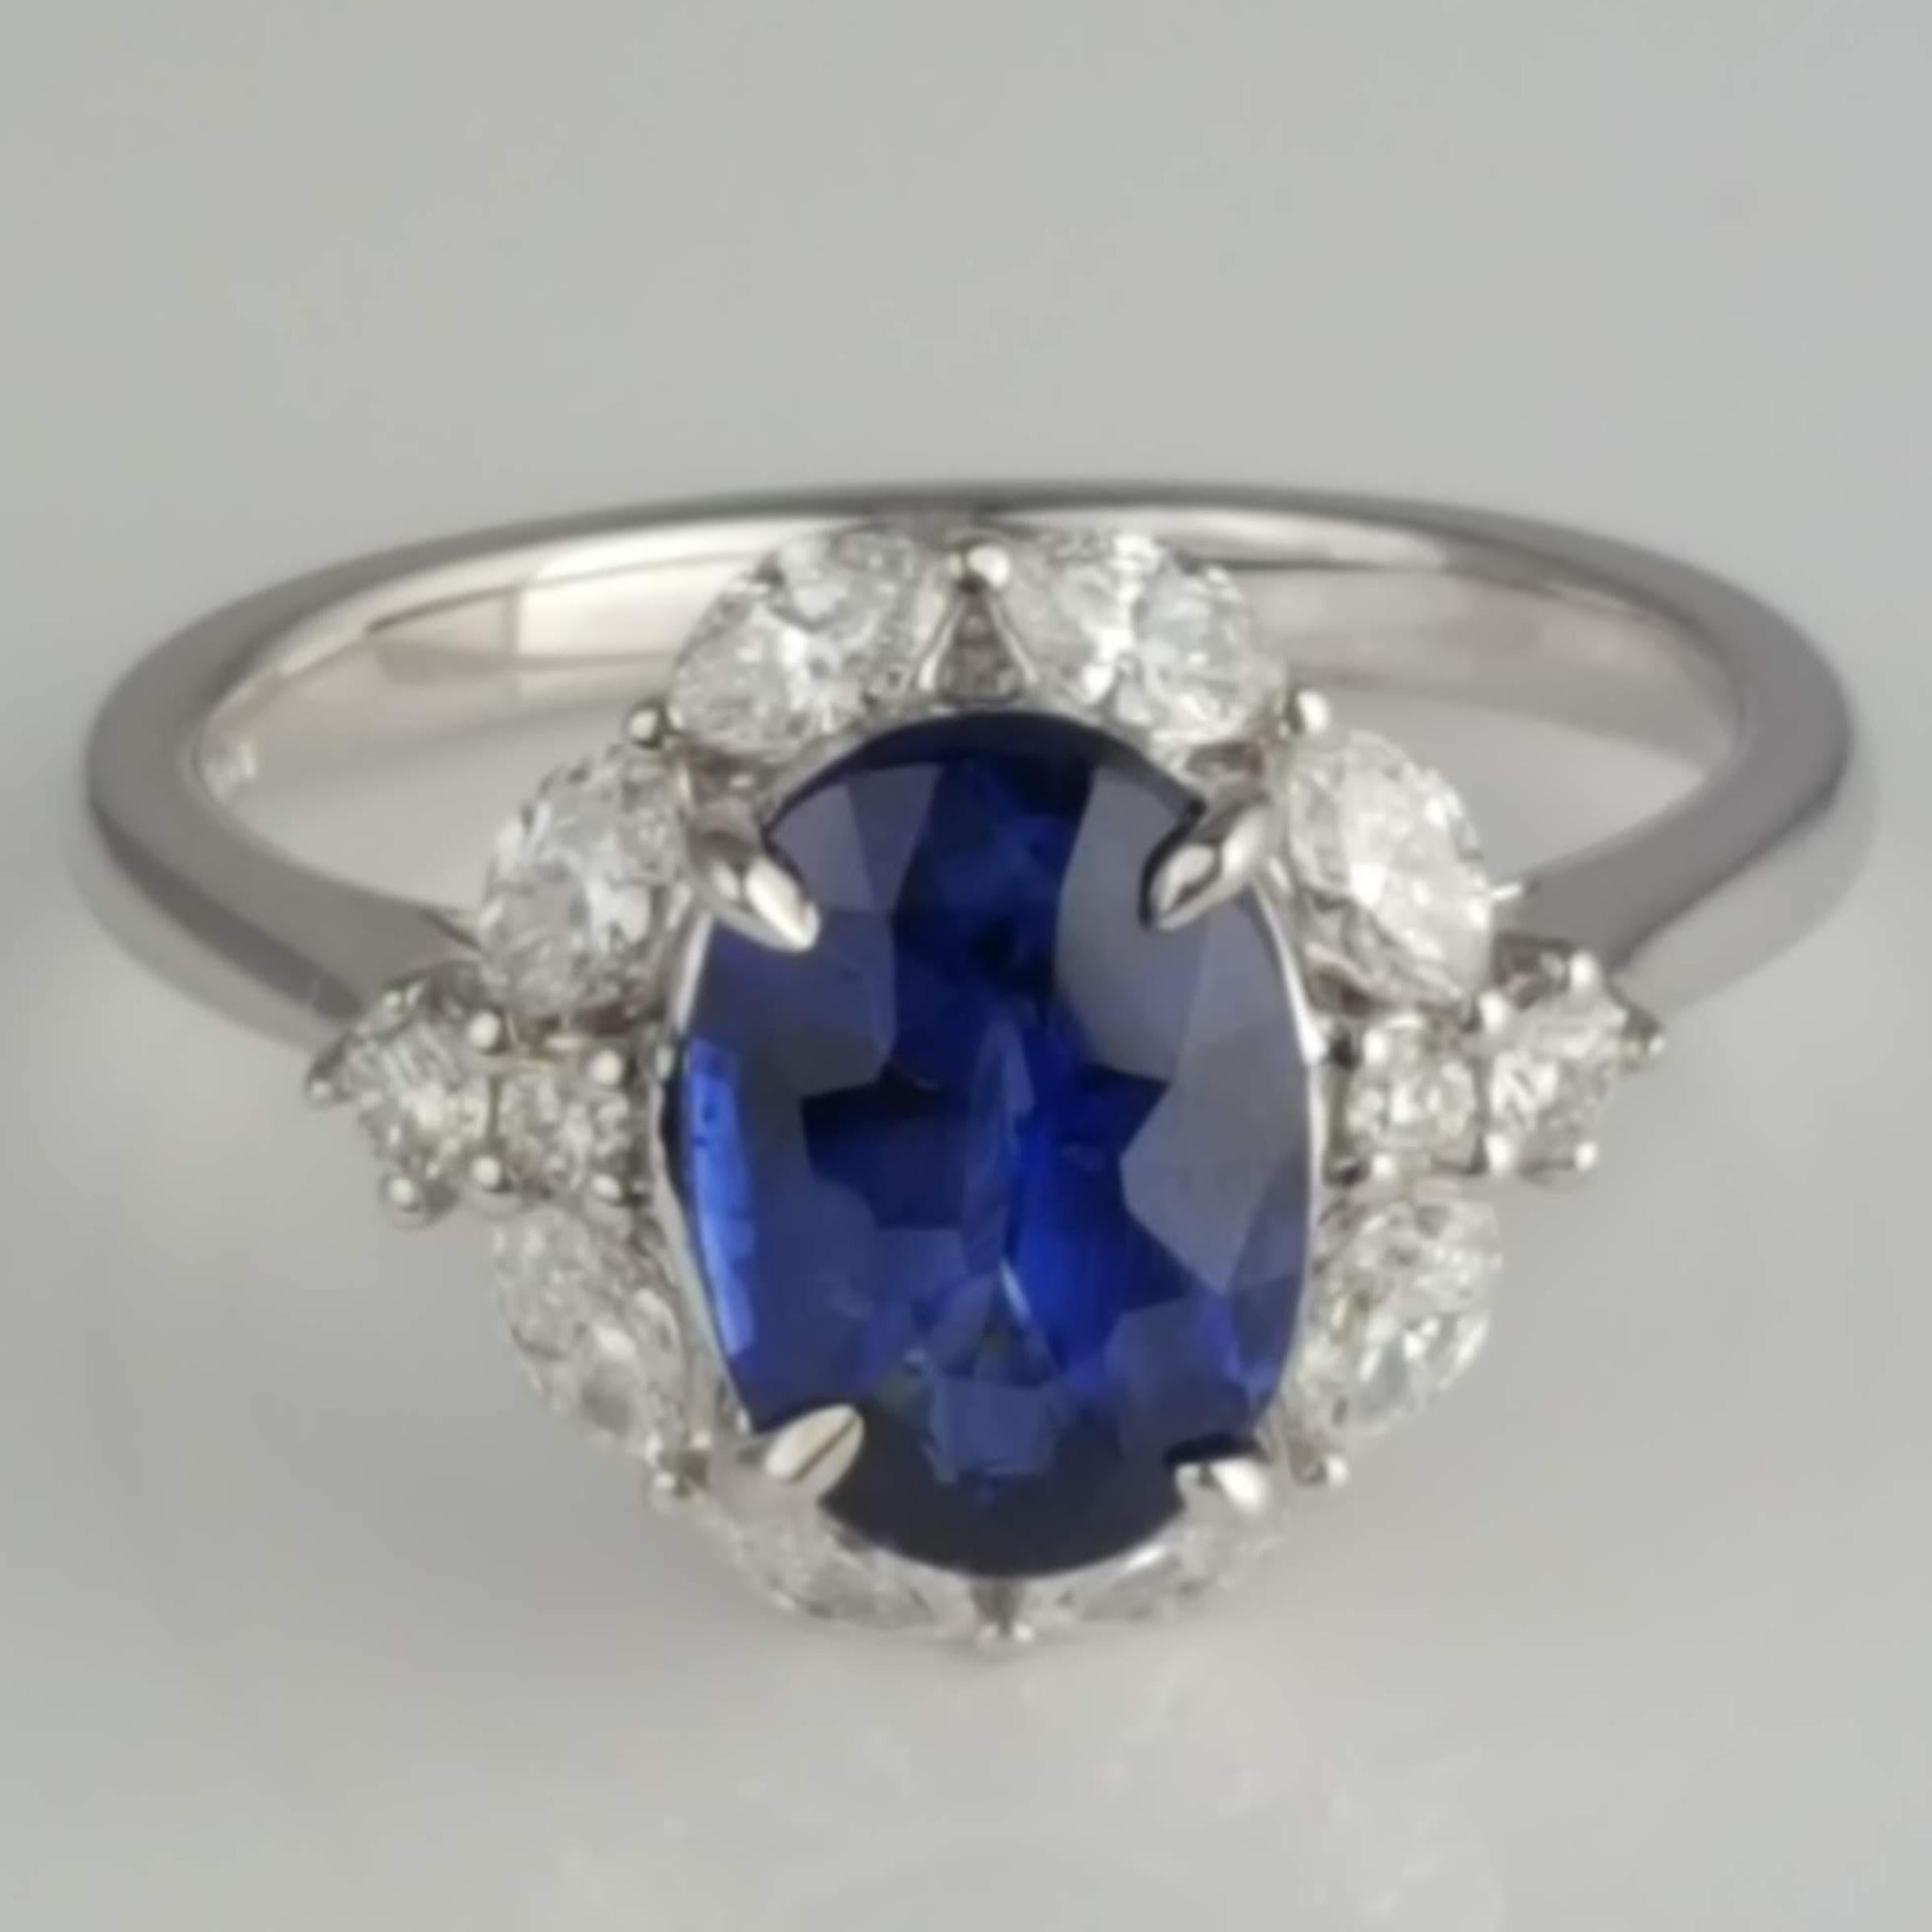 (DiamondTown) This stunning ring not only features a gorgeous GIA Certified oval cut 2.57 carat Ceylon sapphire center, but it is also enhanced by a halo of marquise cut diamonds (total weight 0.67), making it perfect for any occasion. 

GIA